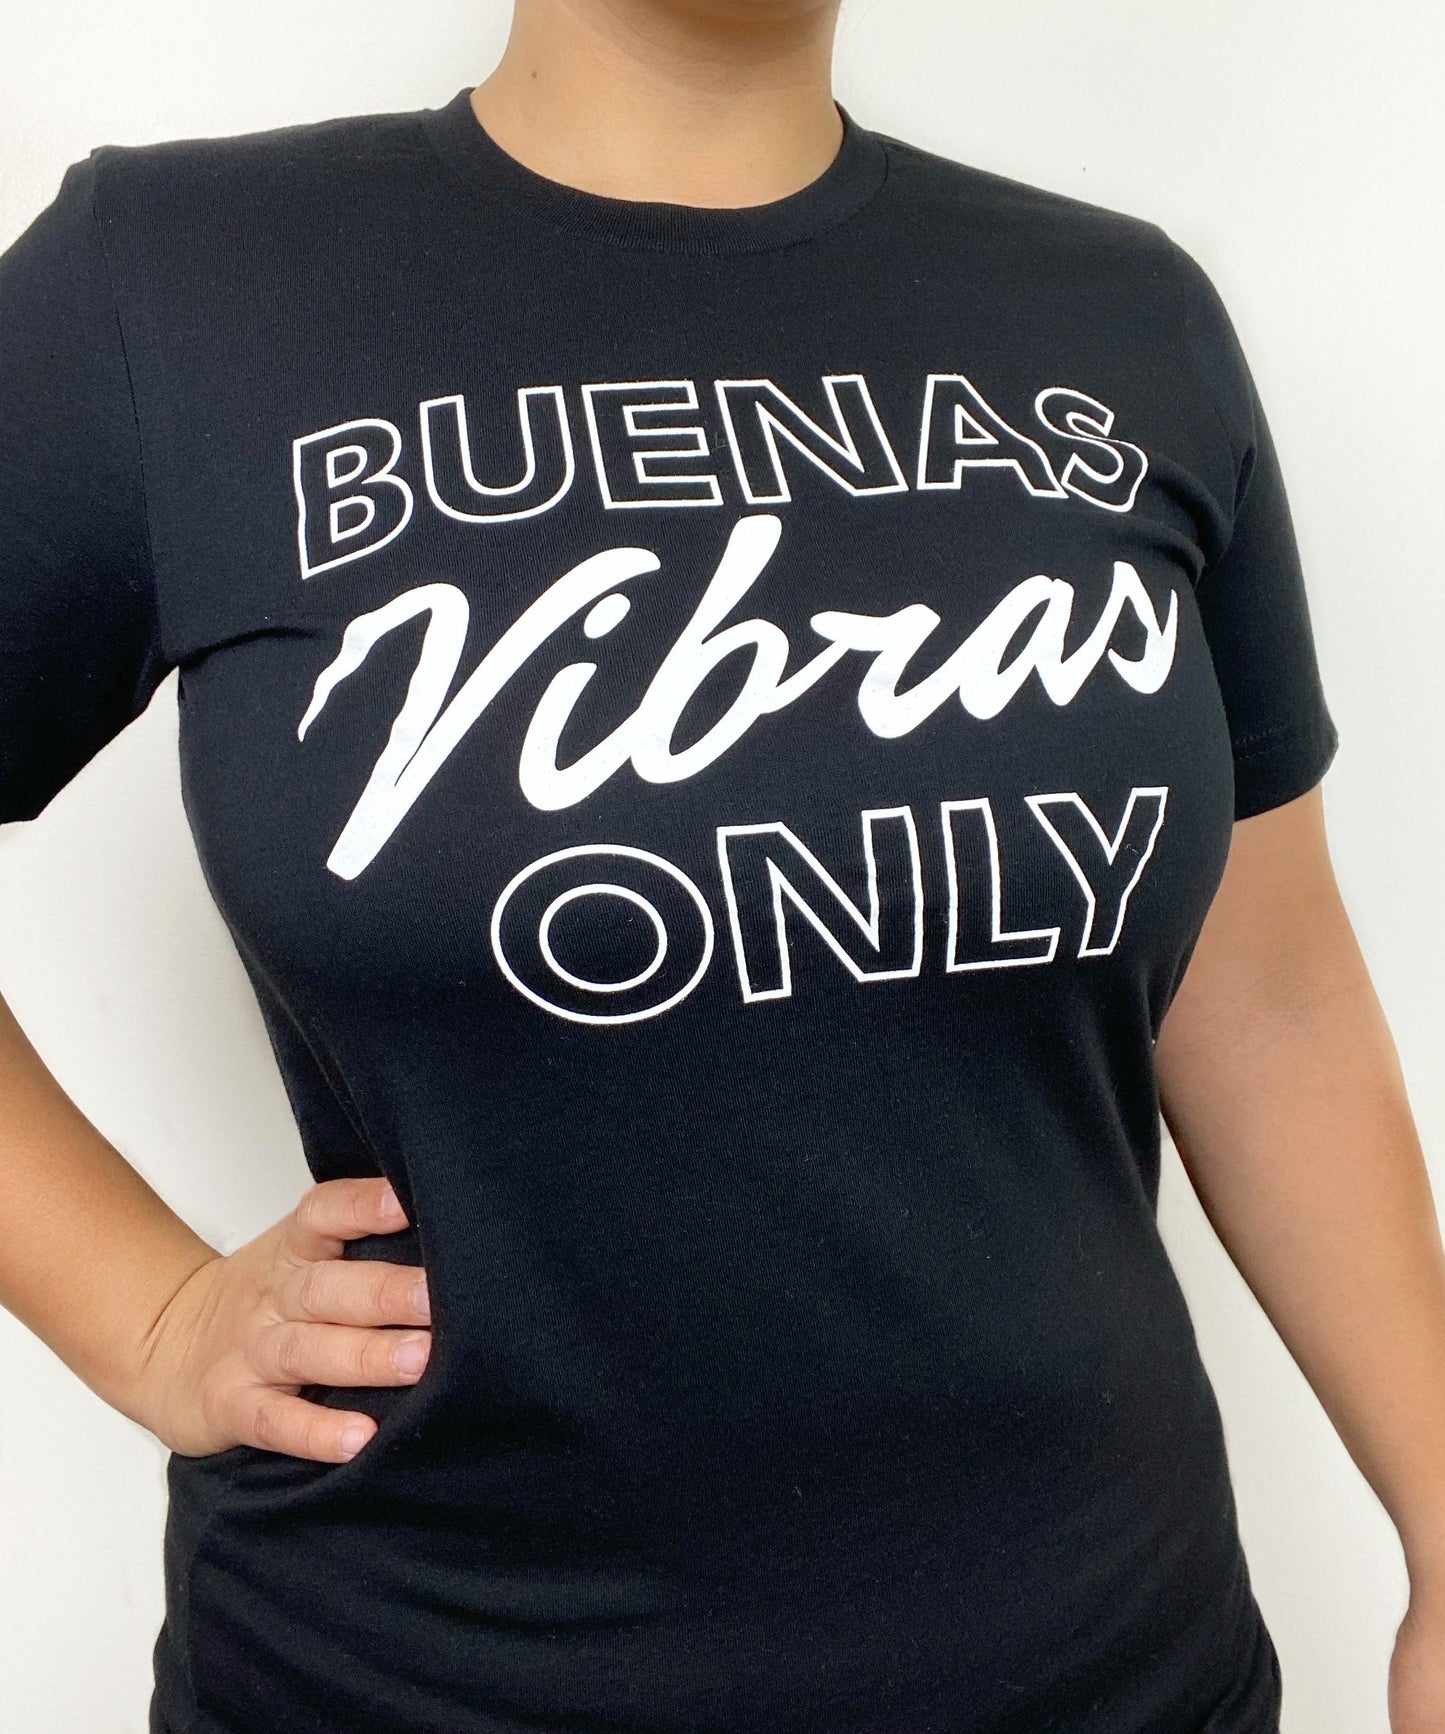 Buenas Vibras Only T-Shirt (Dusty Blue)